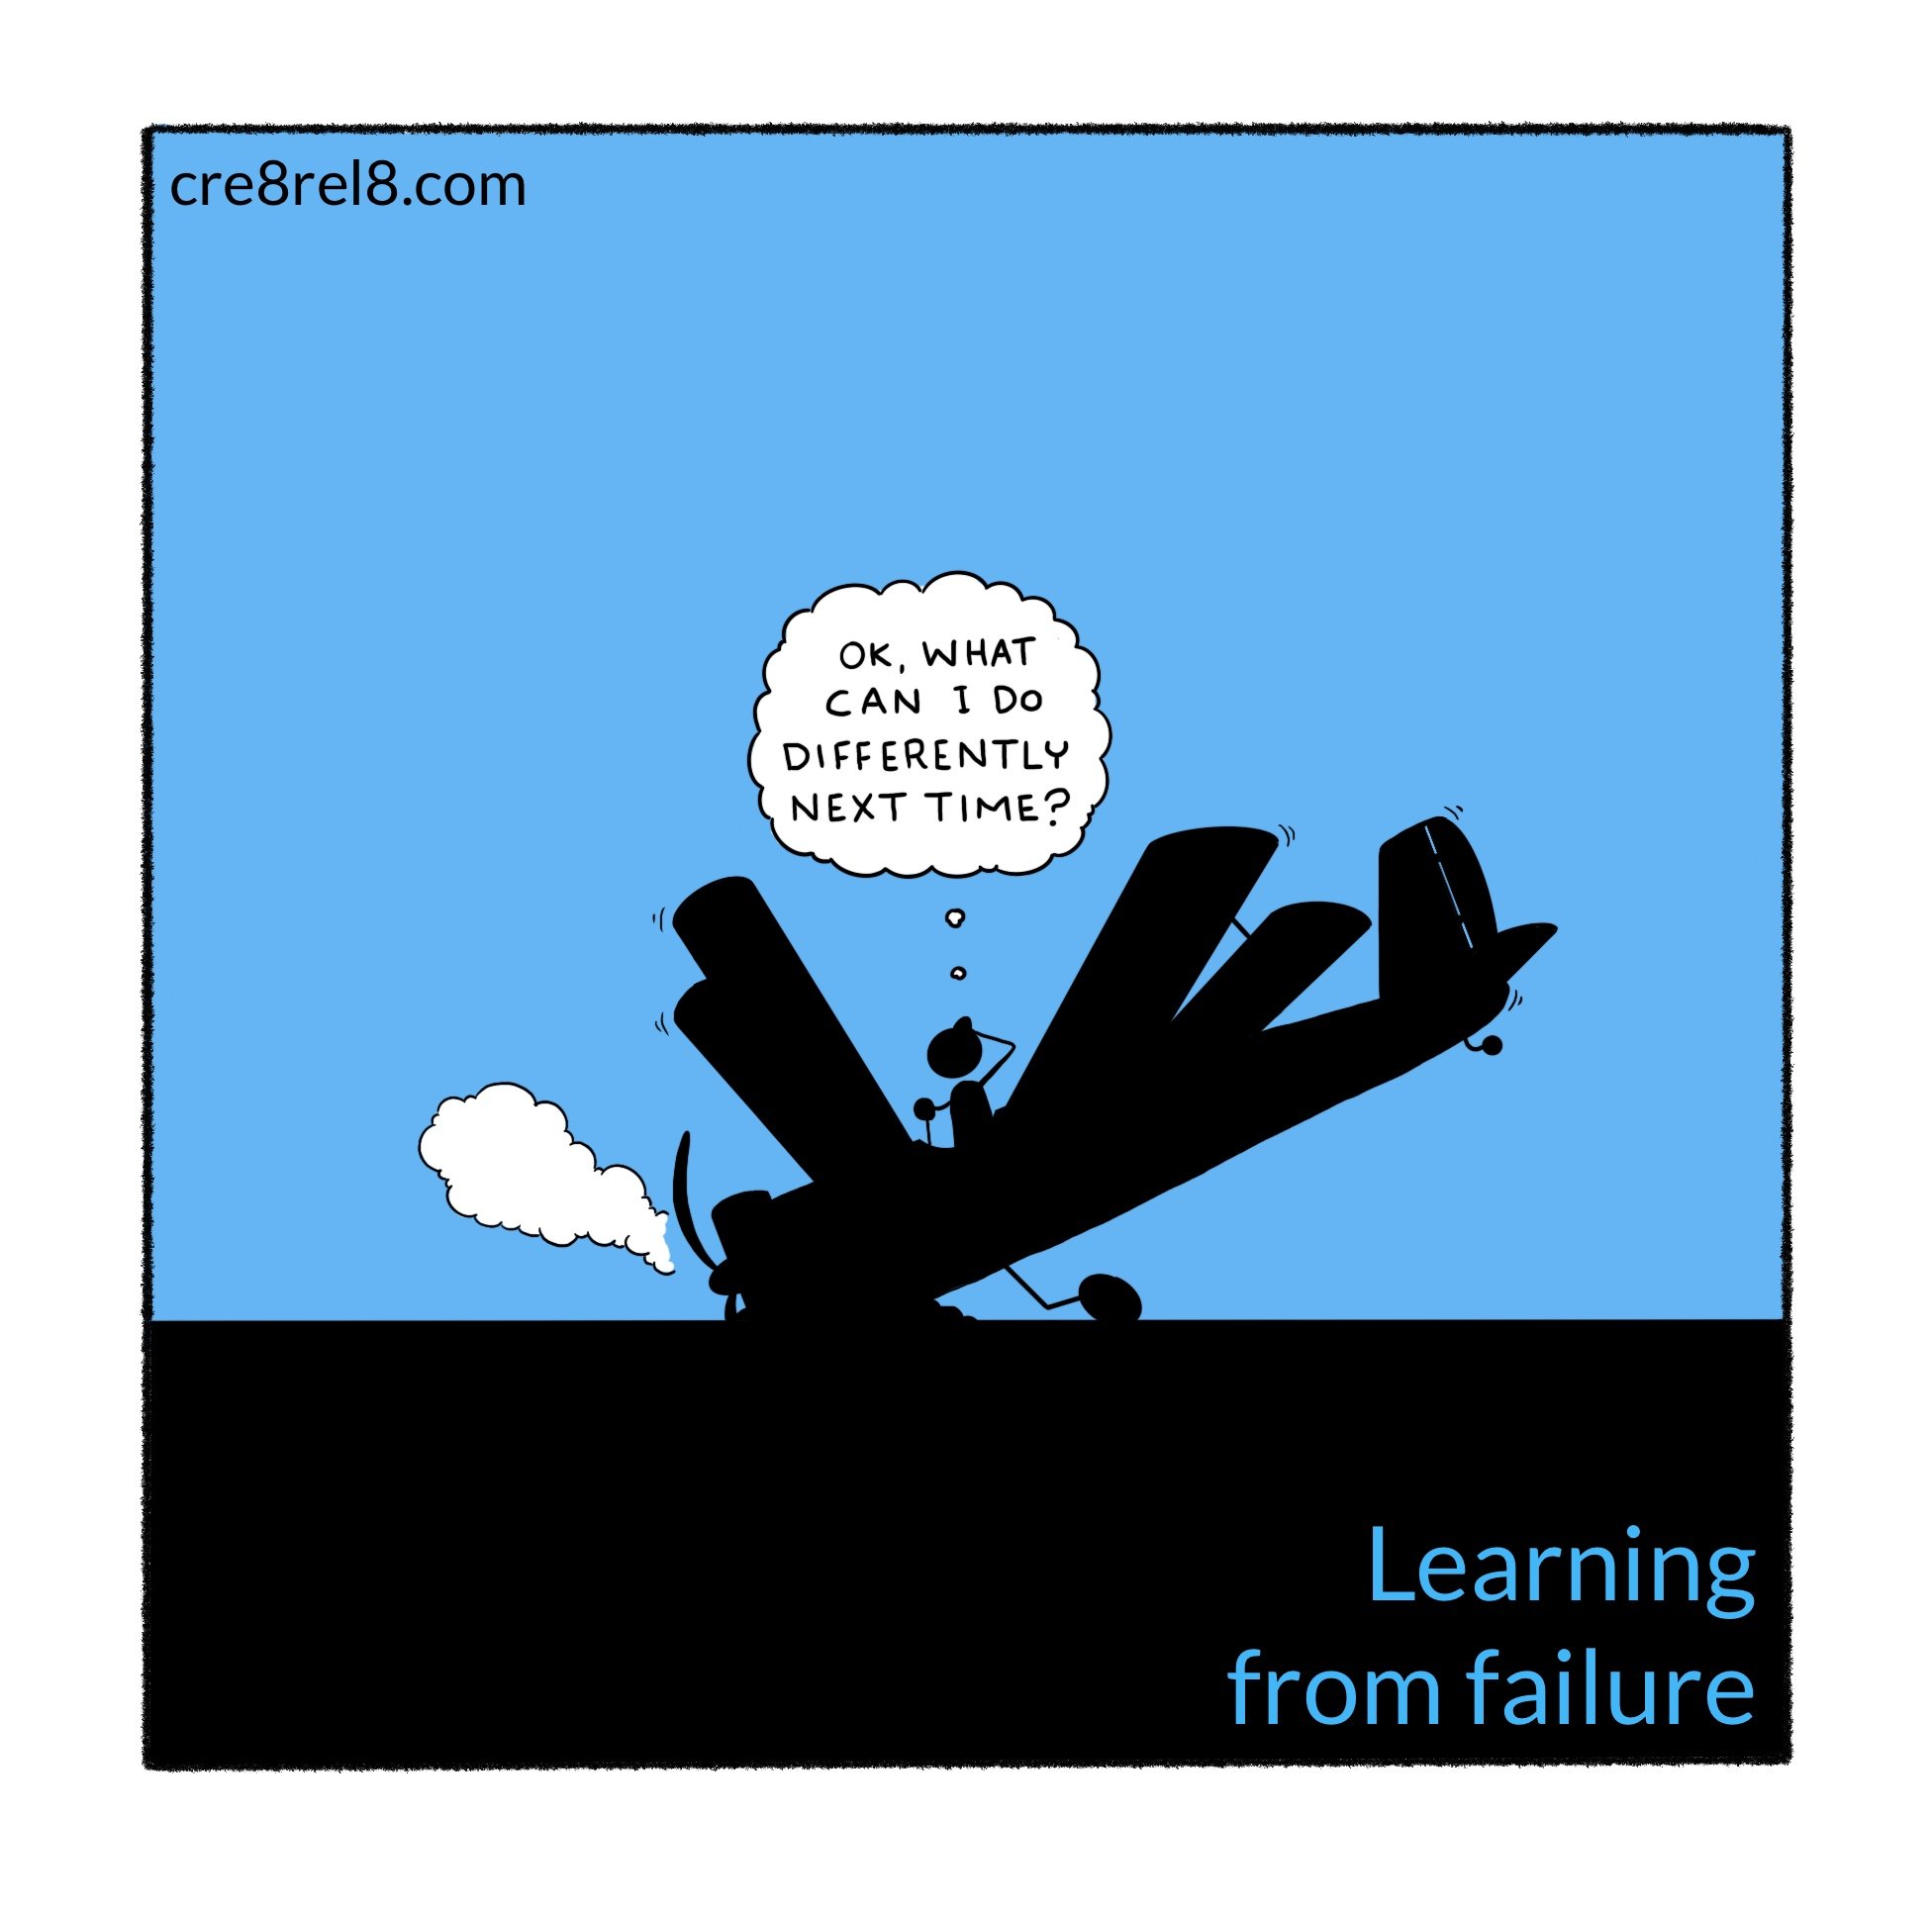 learning from failure2.jpg